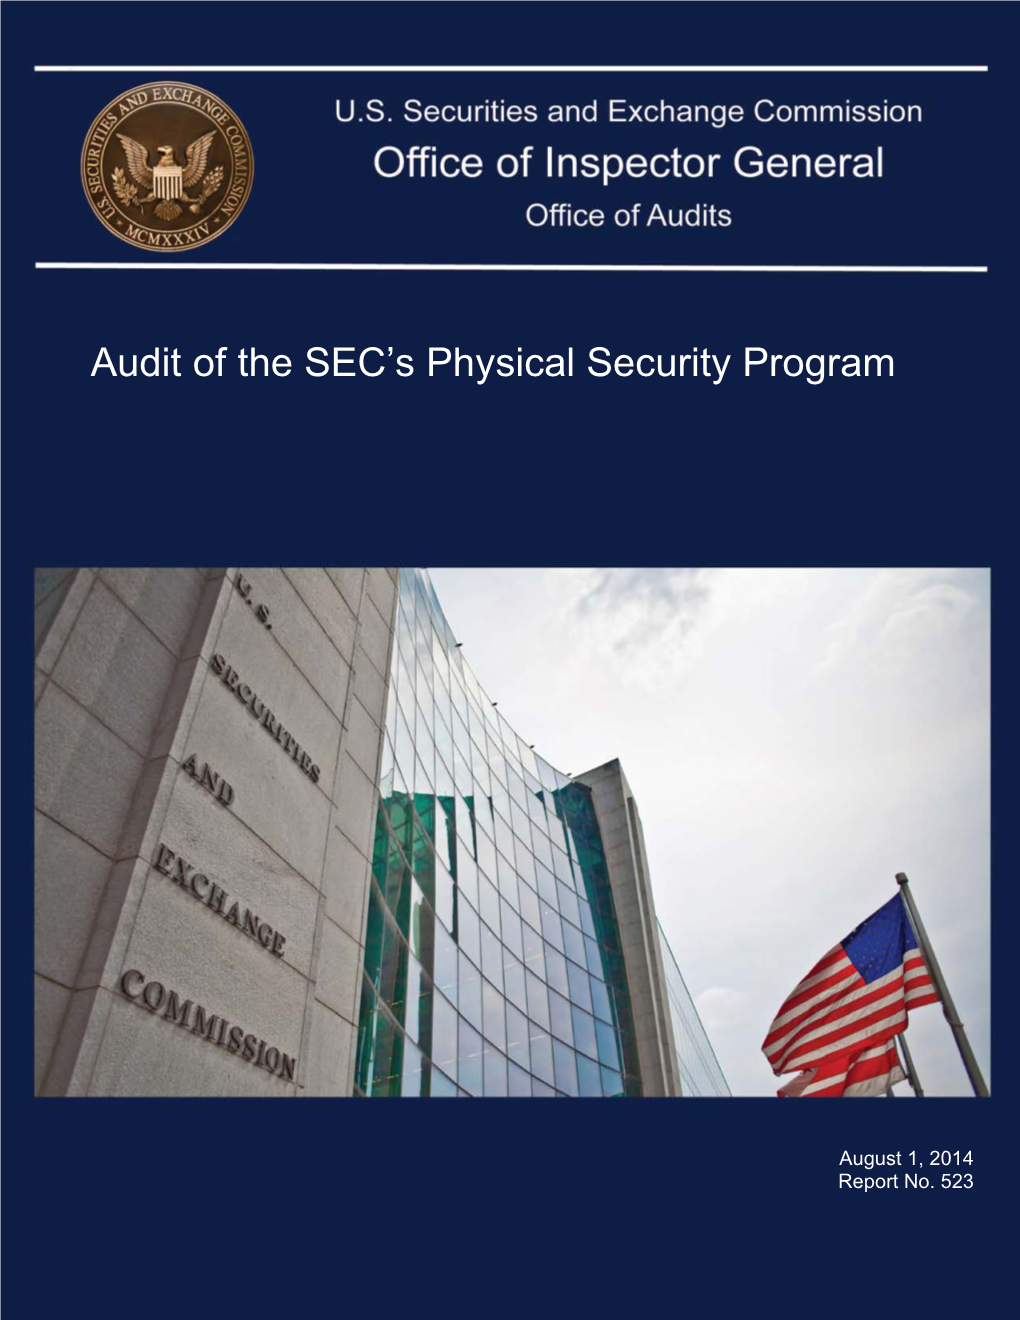 Audit of the SEC's Physical Security Program, Report No. 523